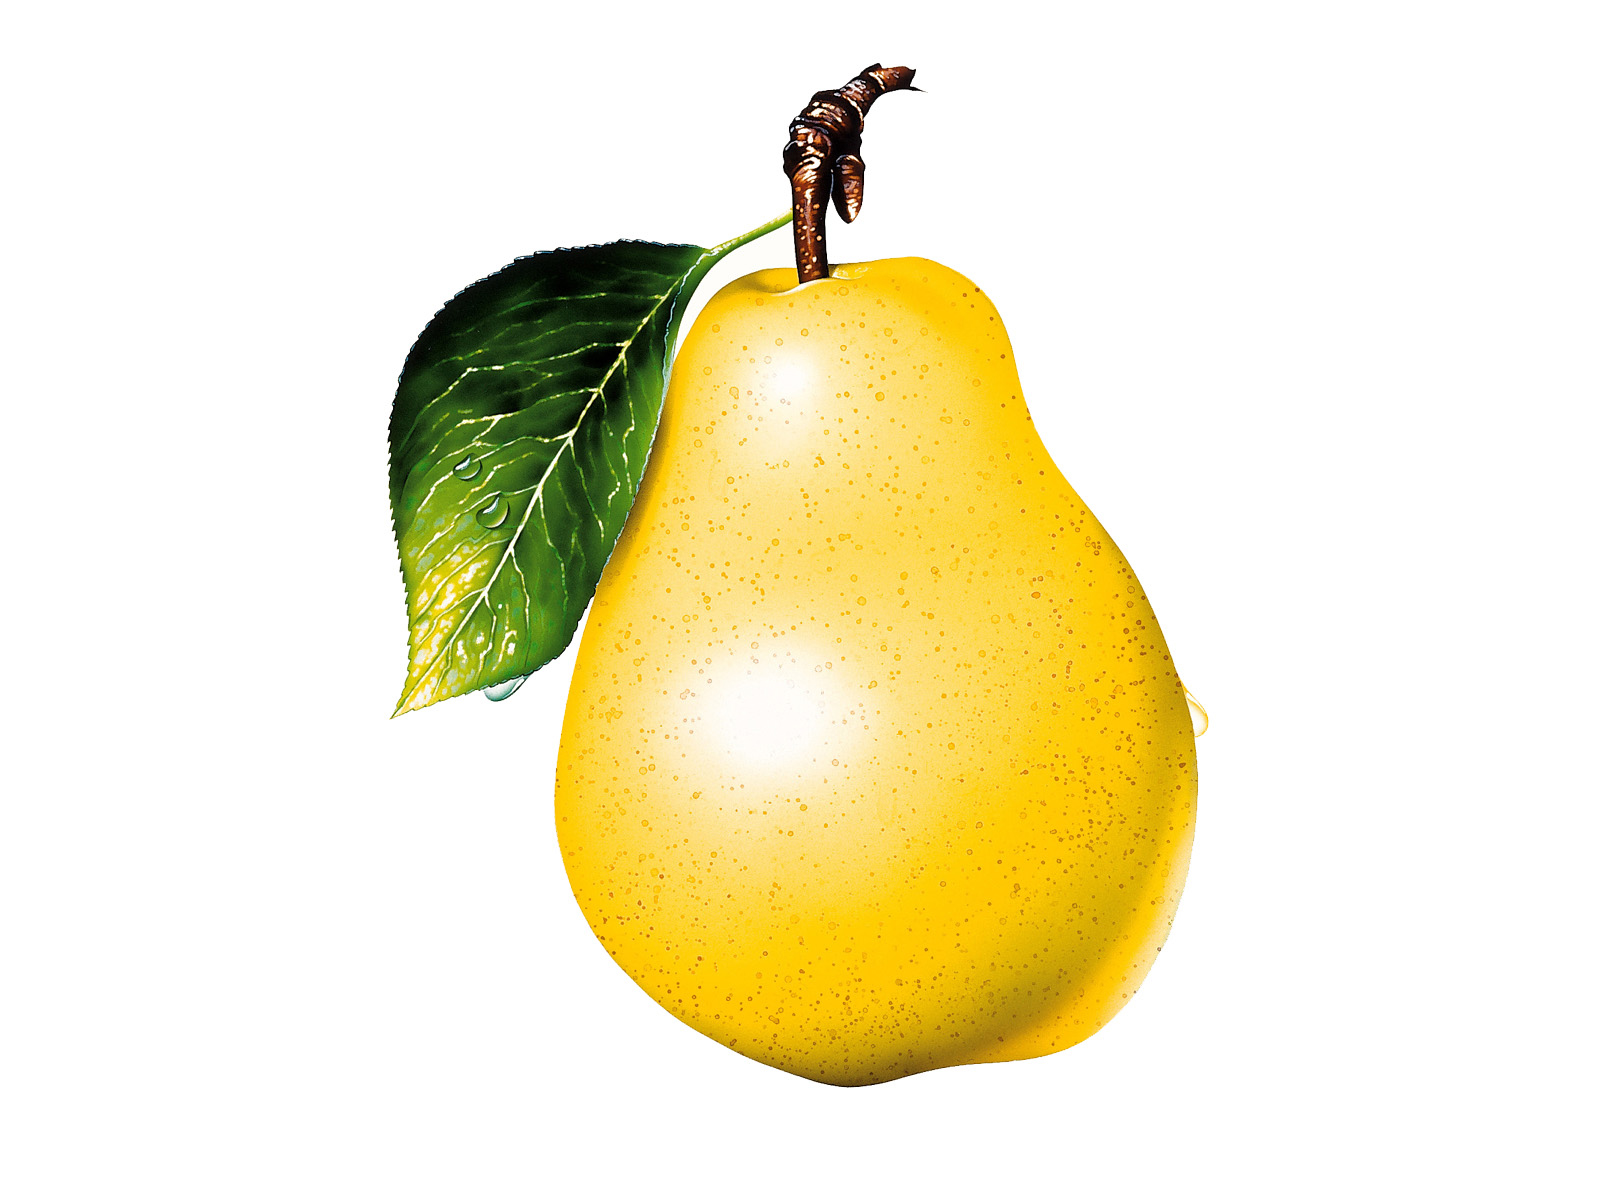 pear, clipart, photo, download